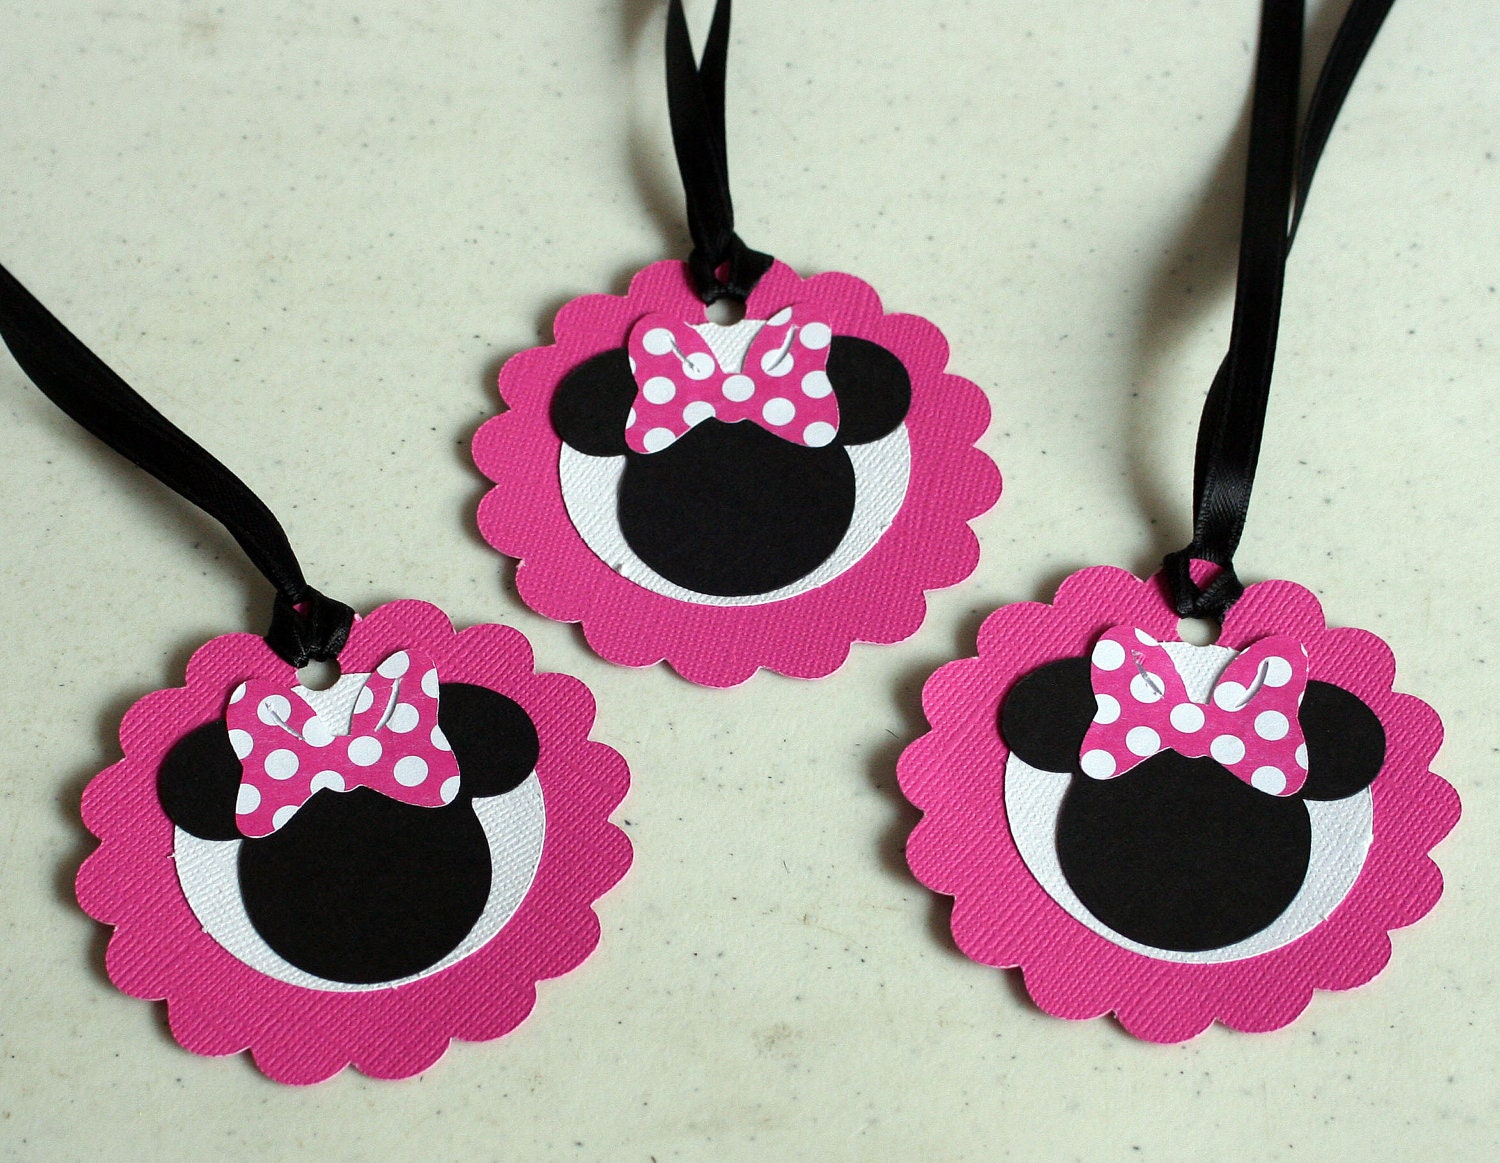 Popular items for minnie mouse favor on Etsy